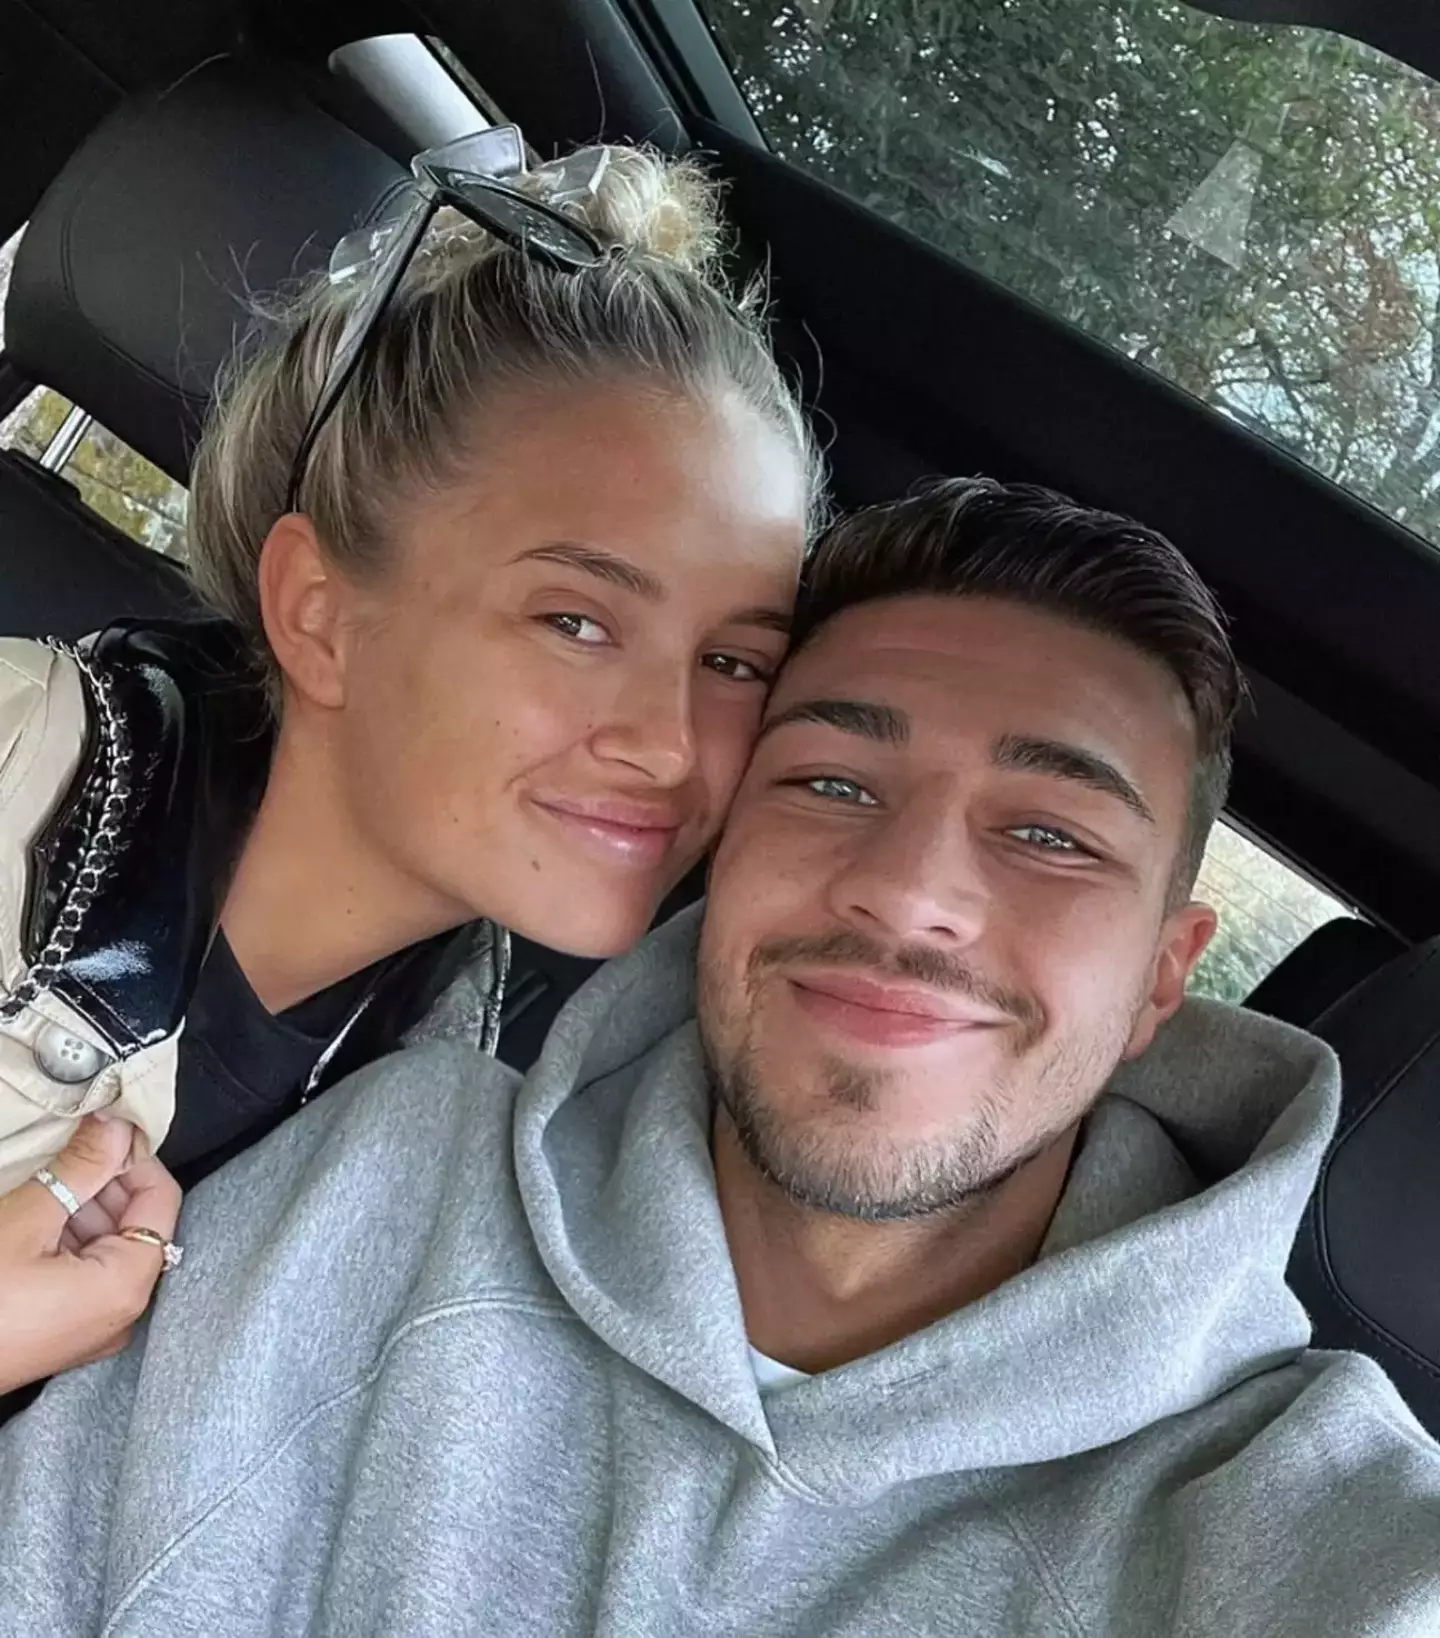 Tommy Fury and Molly-Mae Hague are planning wedding venues.